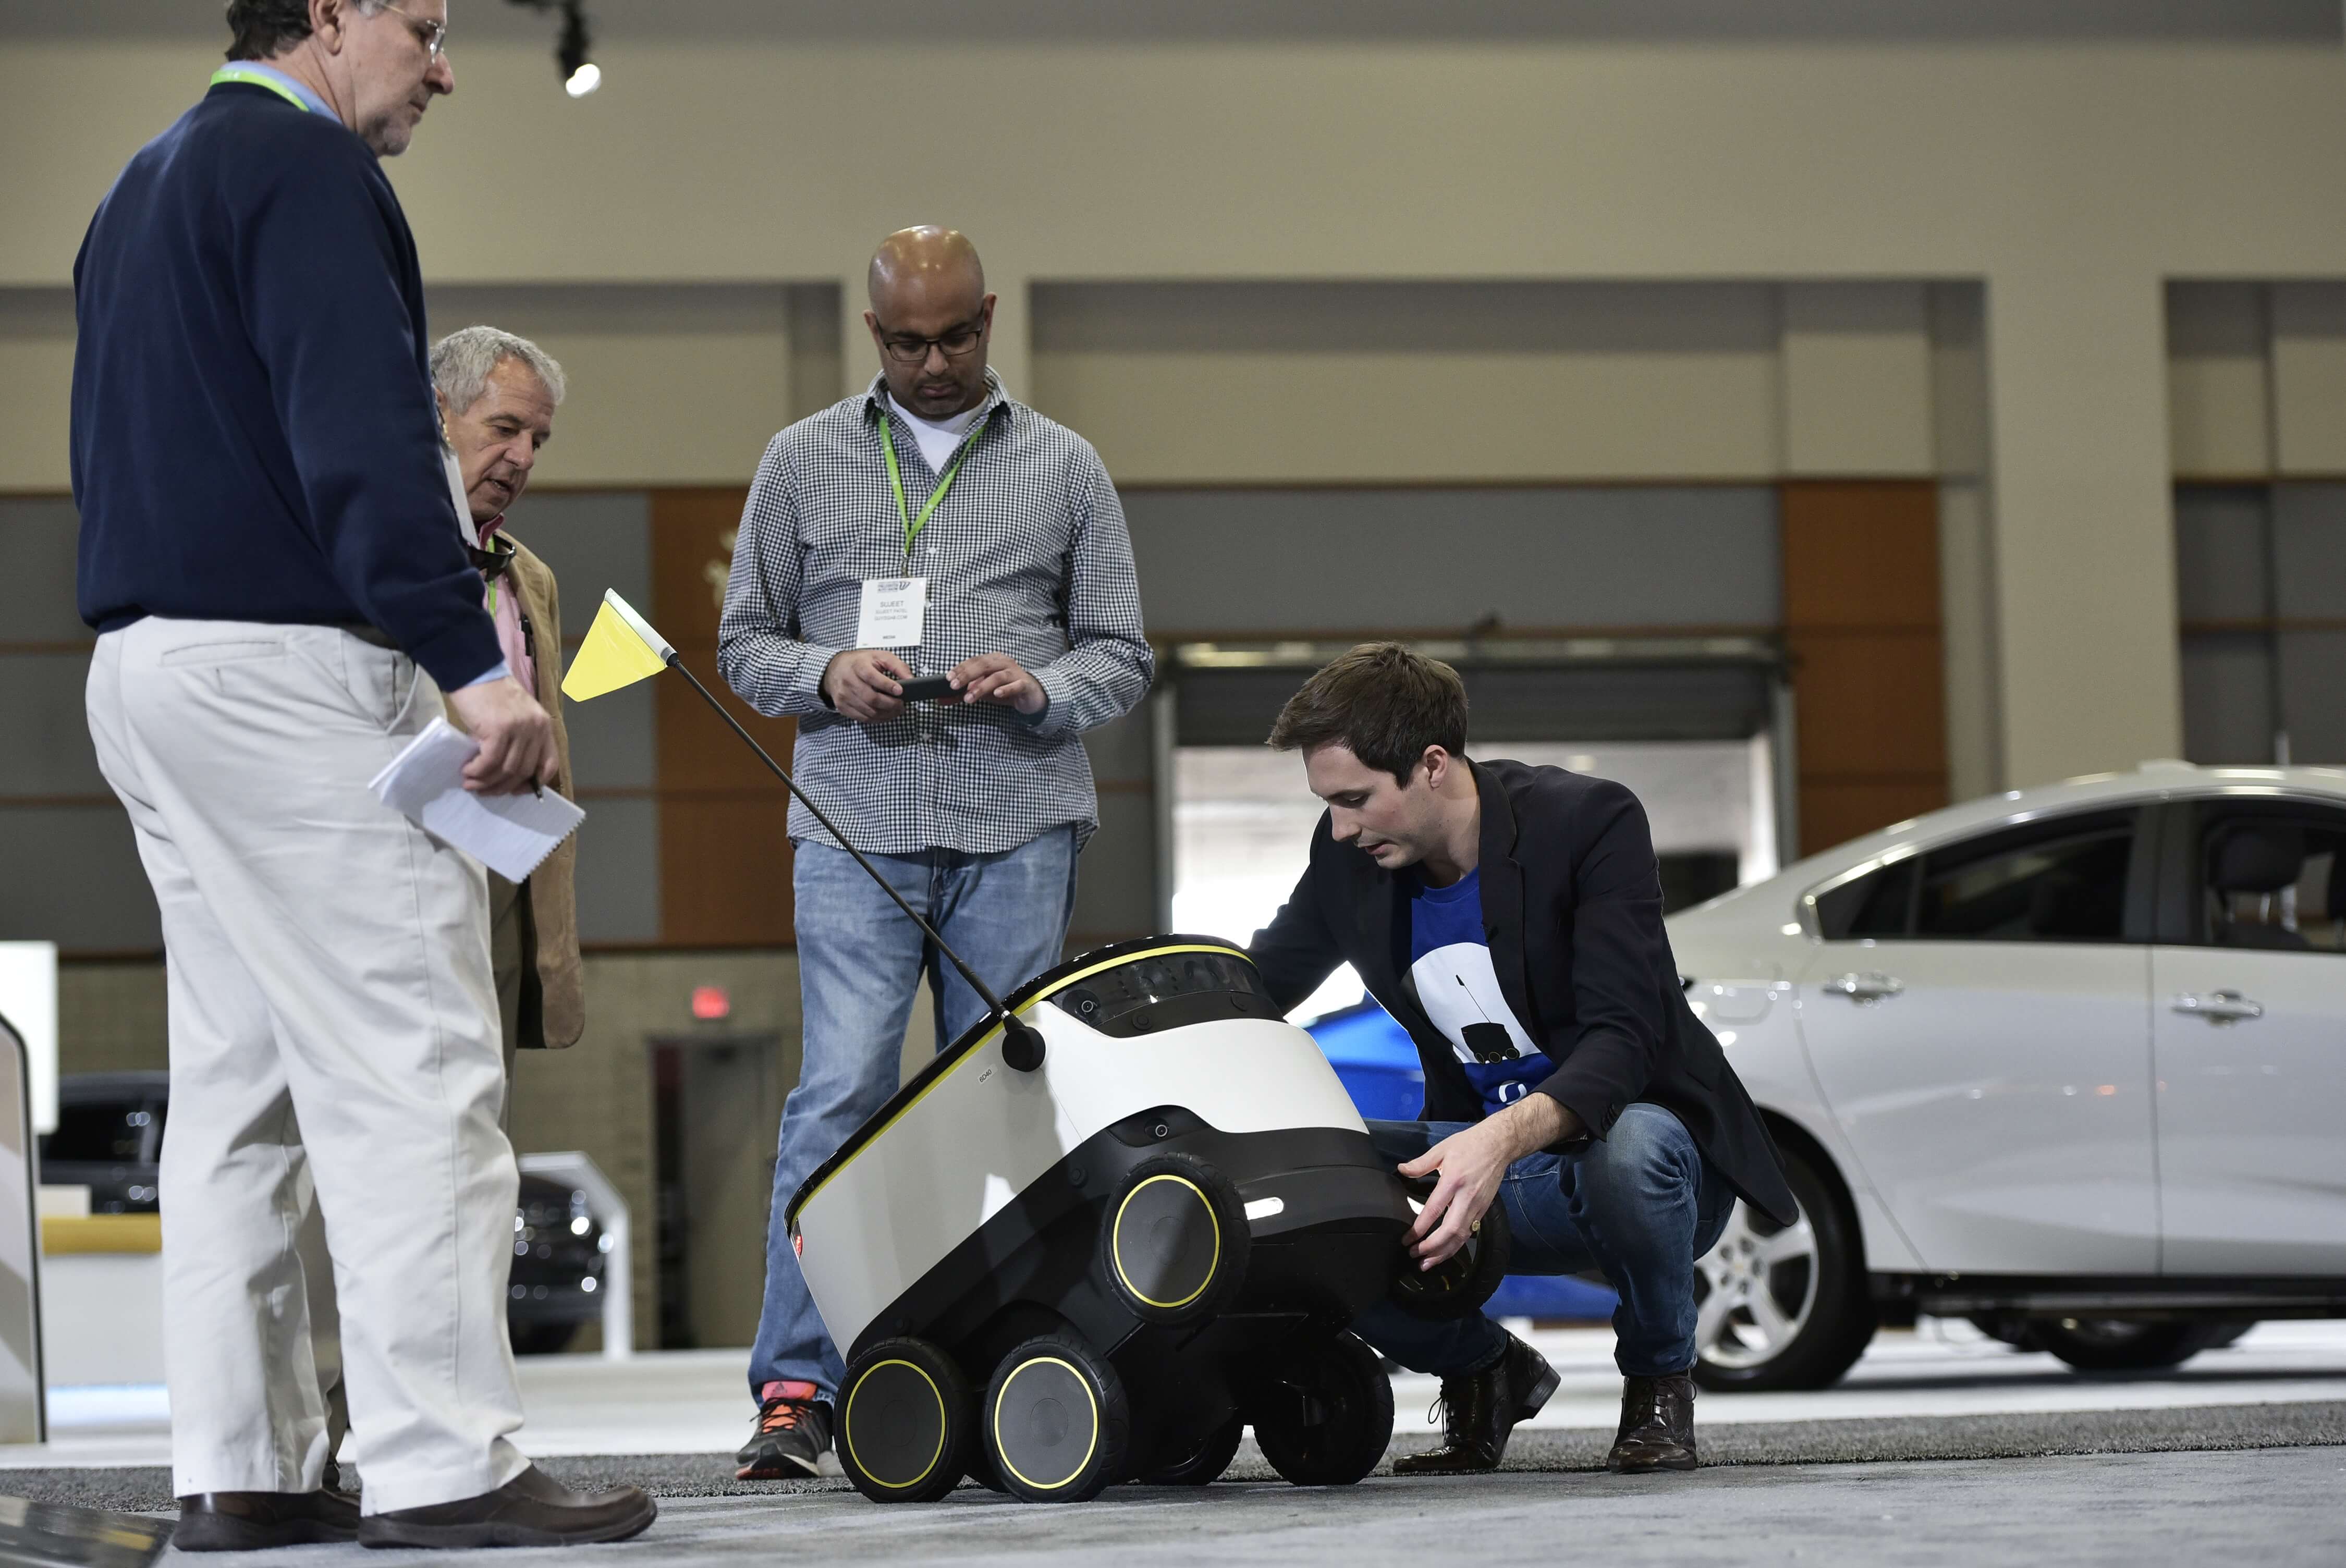 Henry Harris-Burland (R) explains the operation of the Starship Technologies delivery robot